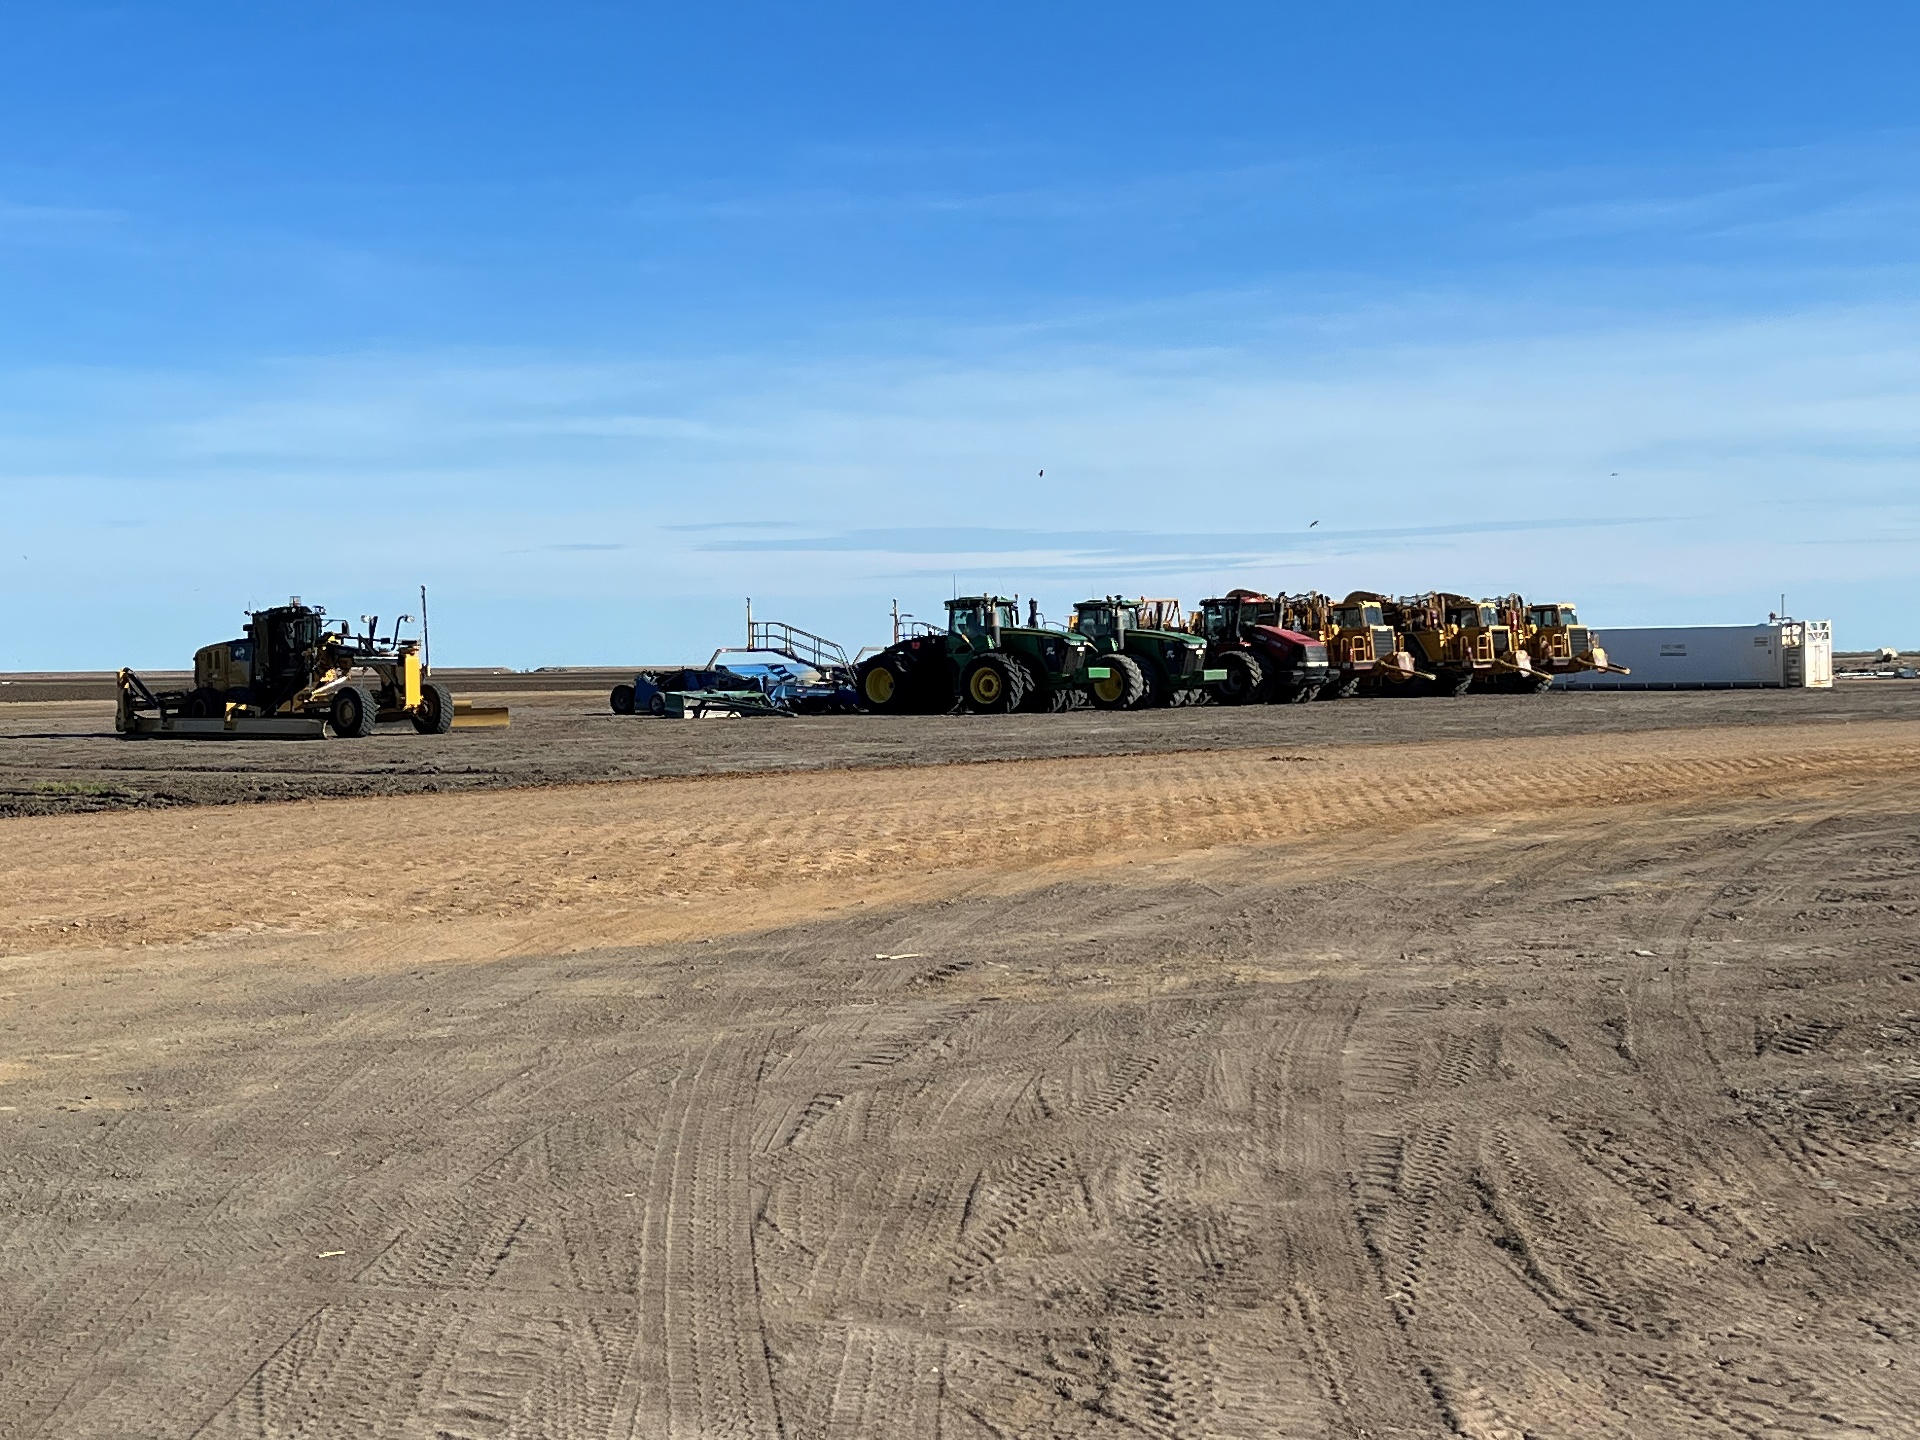 A number of tractors and large machinery are lined up in a dirt paddock